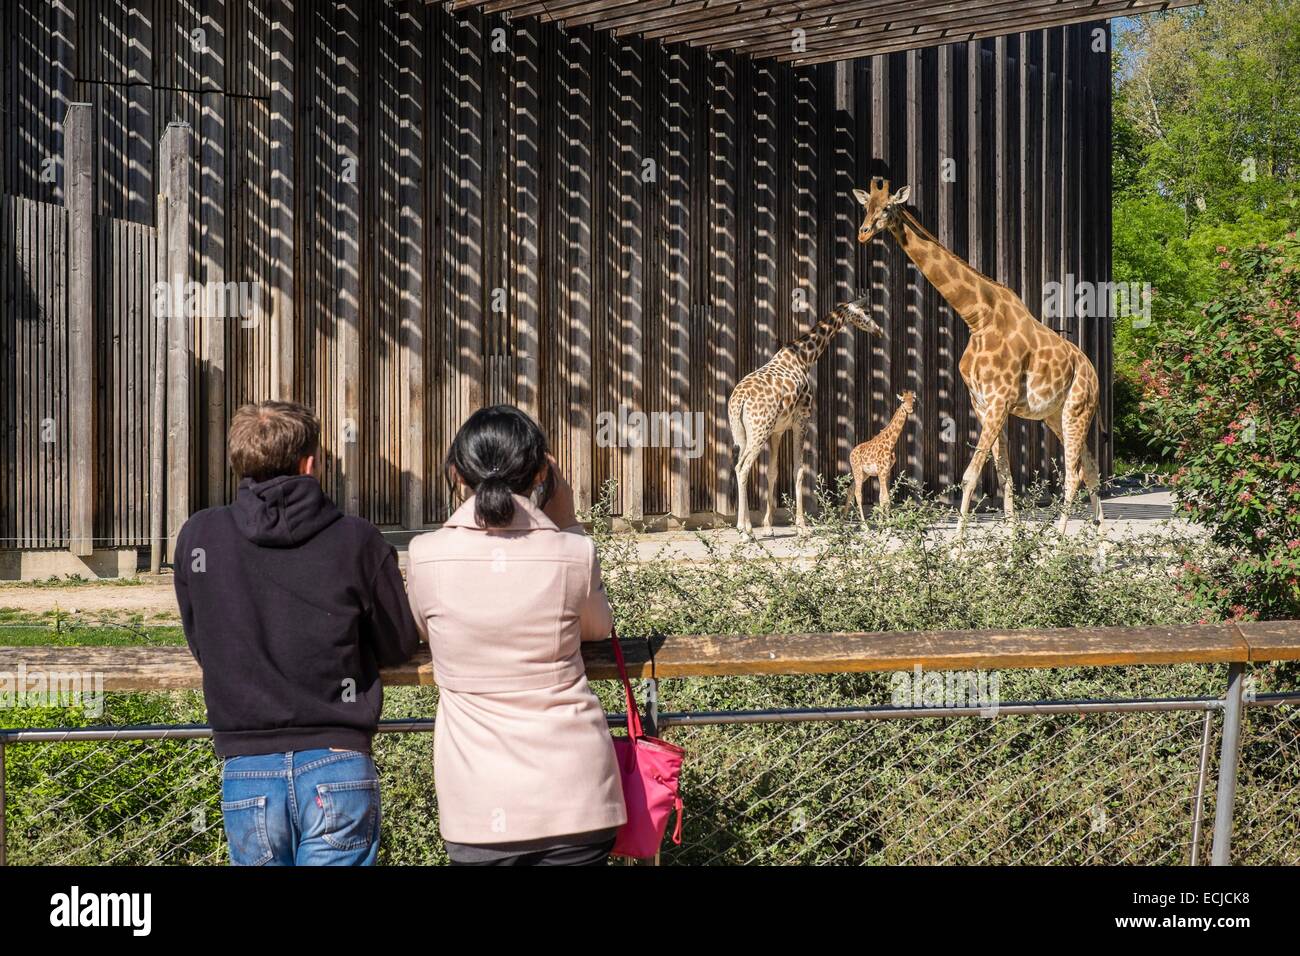 France, Rhone, Lyon, Parc de la Tete d'Or or Park of the Golden Head, Lyon Zoo is a free zoo, fully renovated in 2006, housing on 10 acres around 400 animals, giraffes Stock Photo